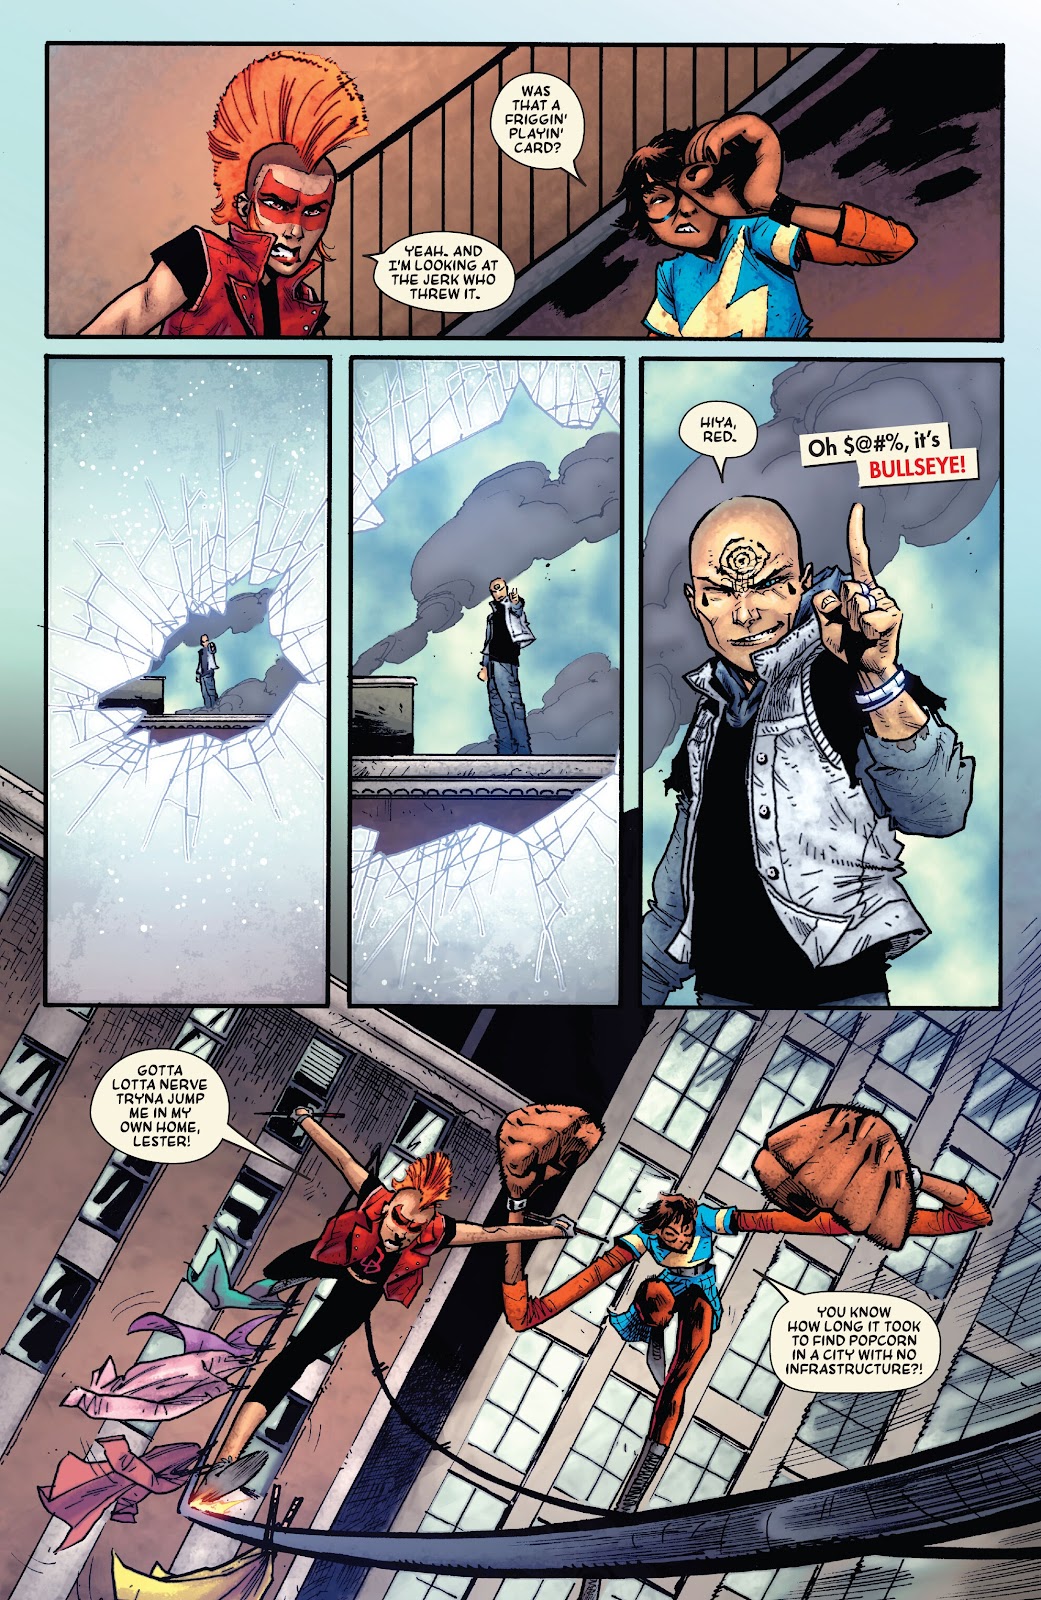 Spider-Punk: Arms Race issue 1 - Page 27